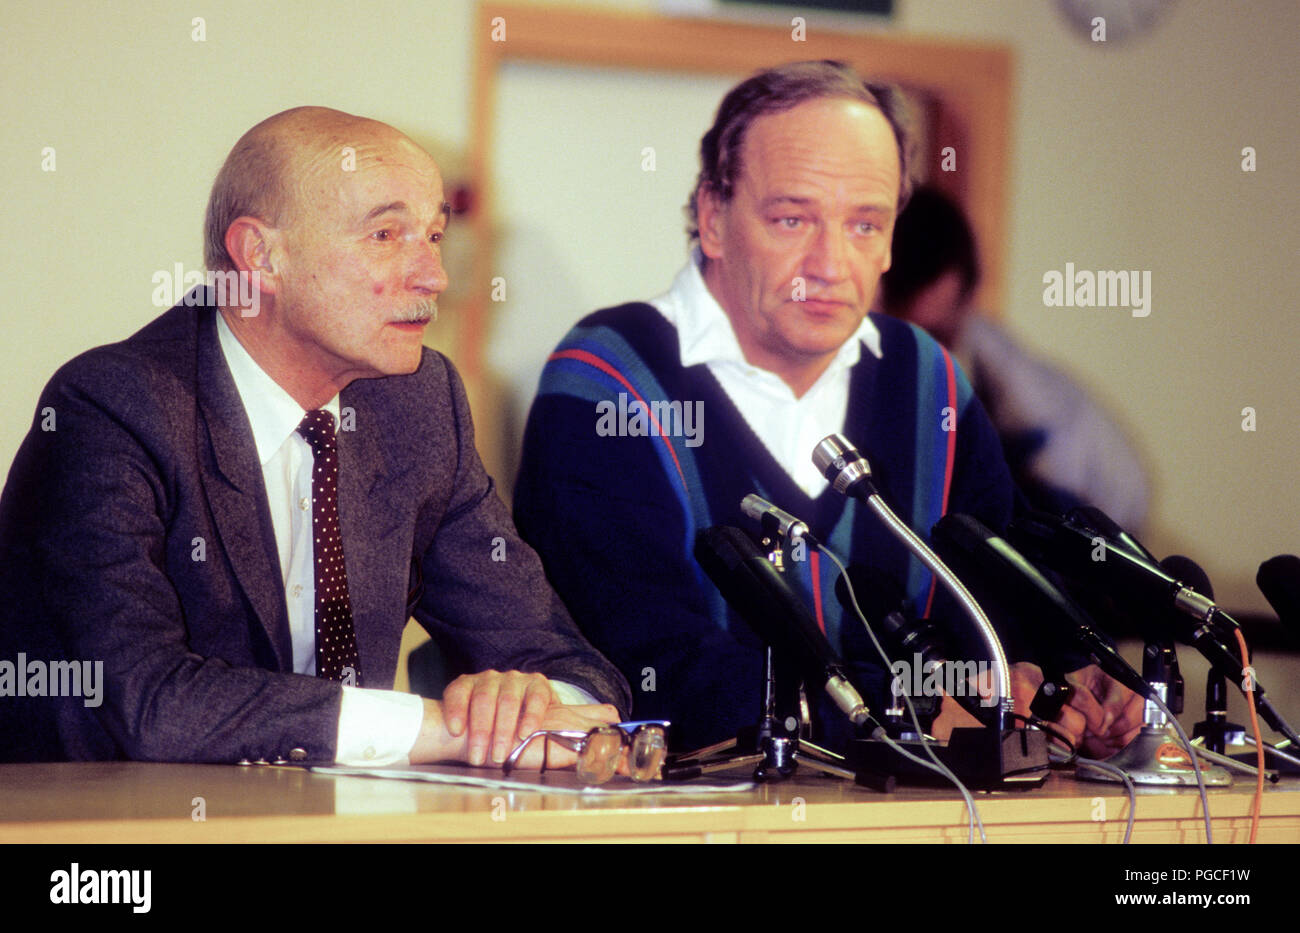 CLAES ZEIME investigator of the Olof Palme murder 1986 in Stockholm together with police chief Hans Holmér at a pressconference Stock Photo